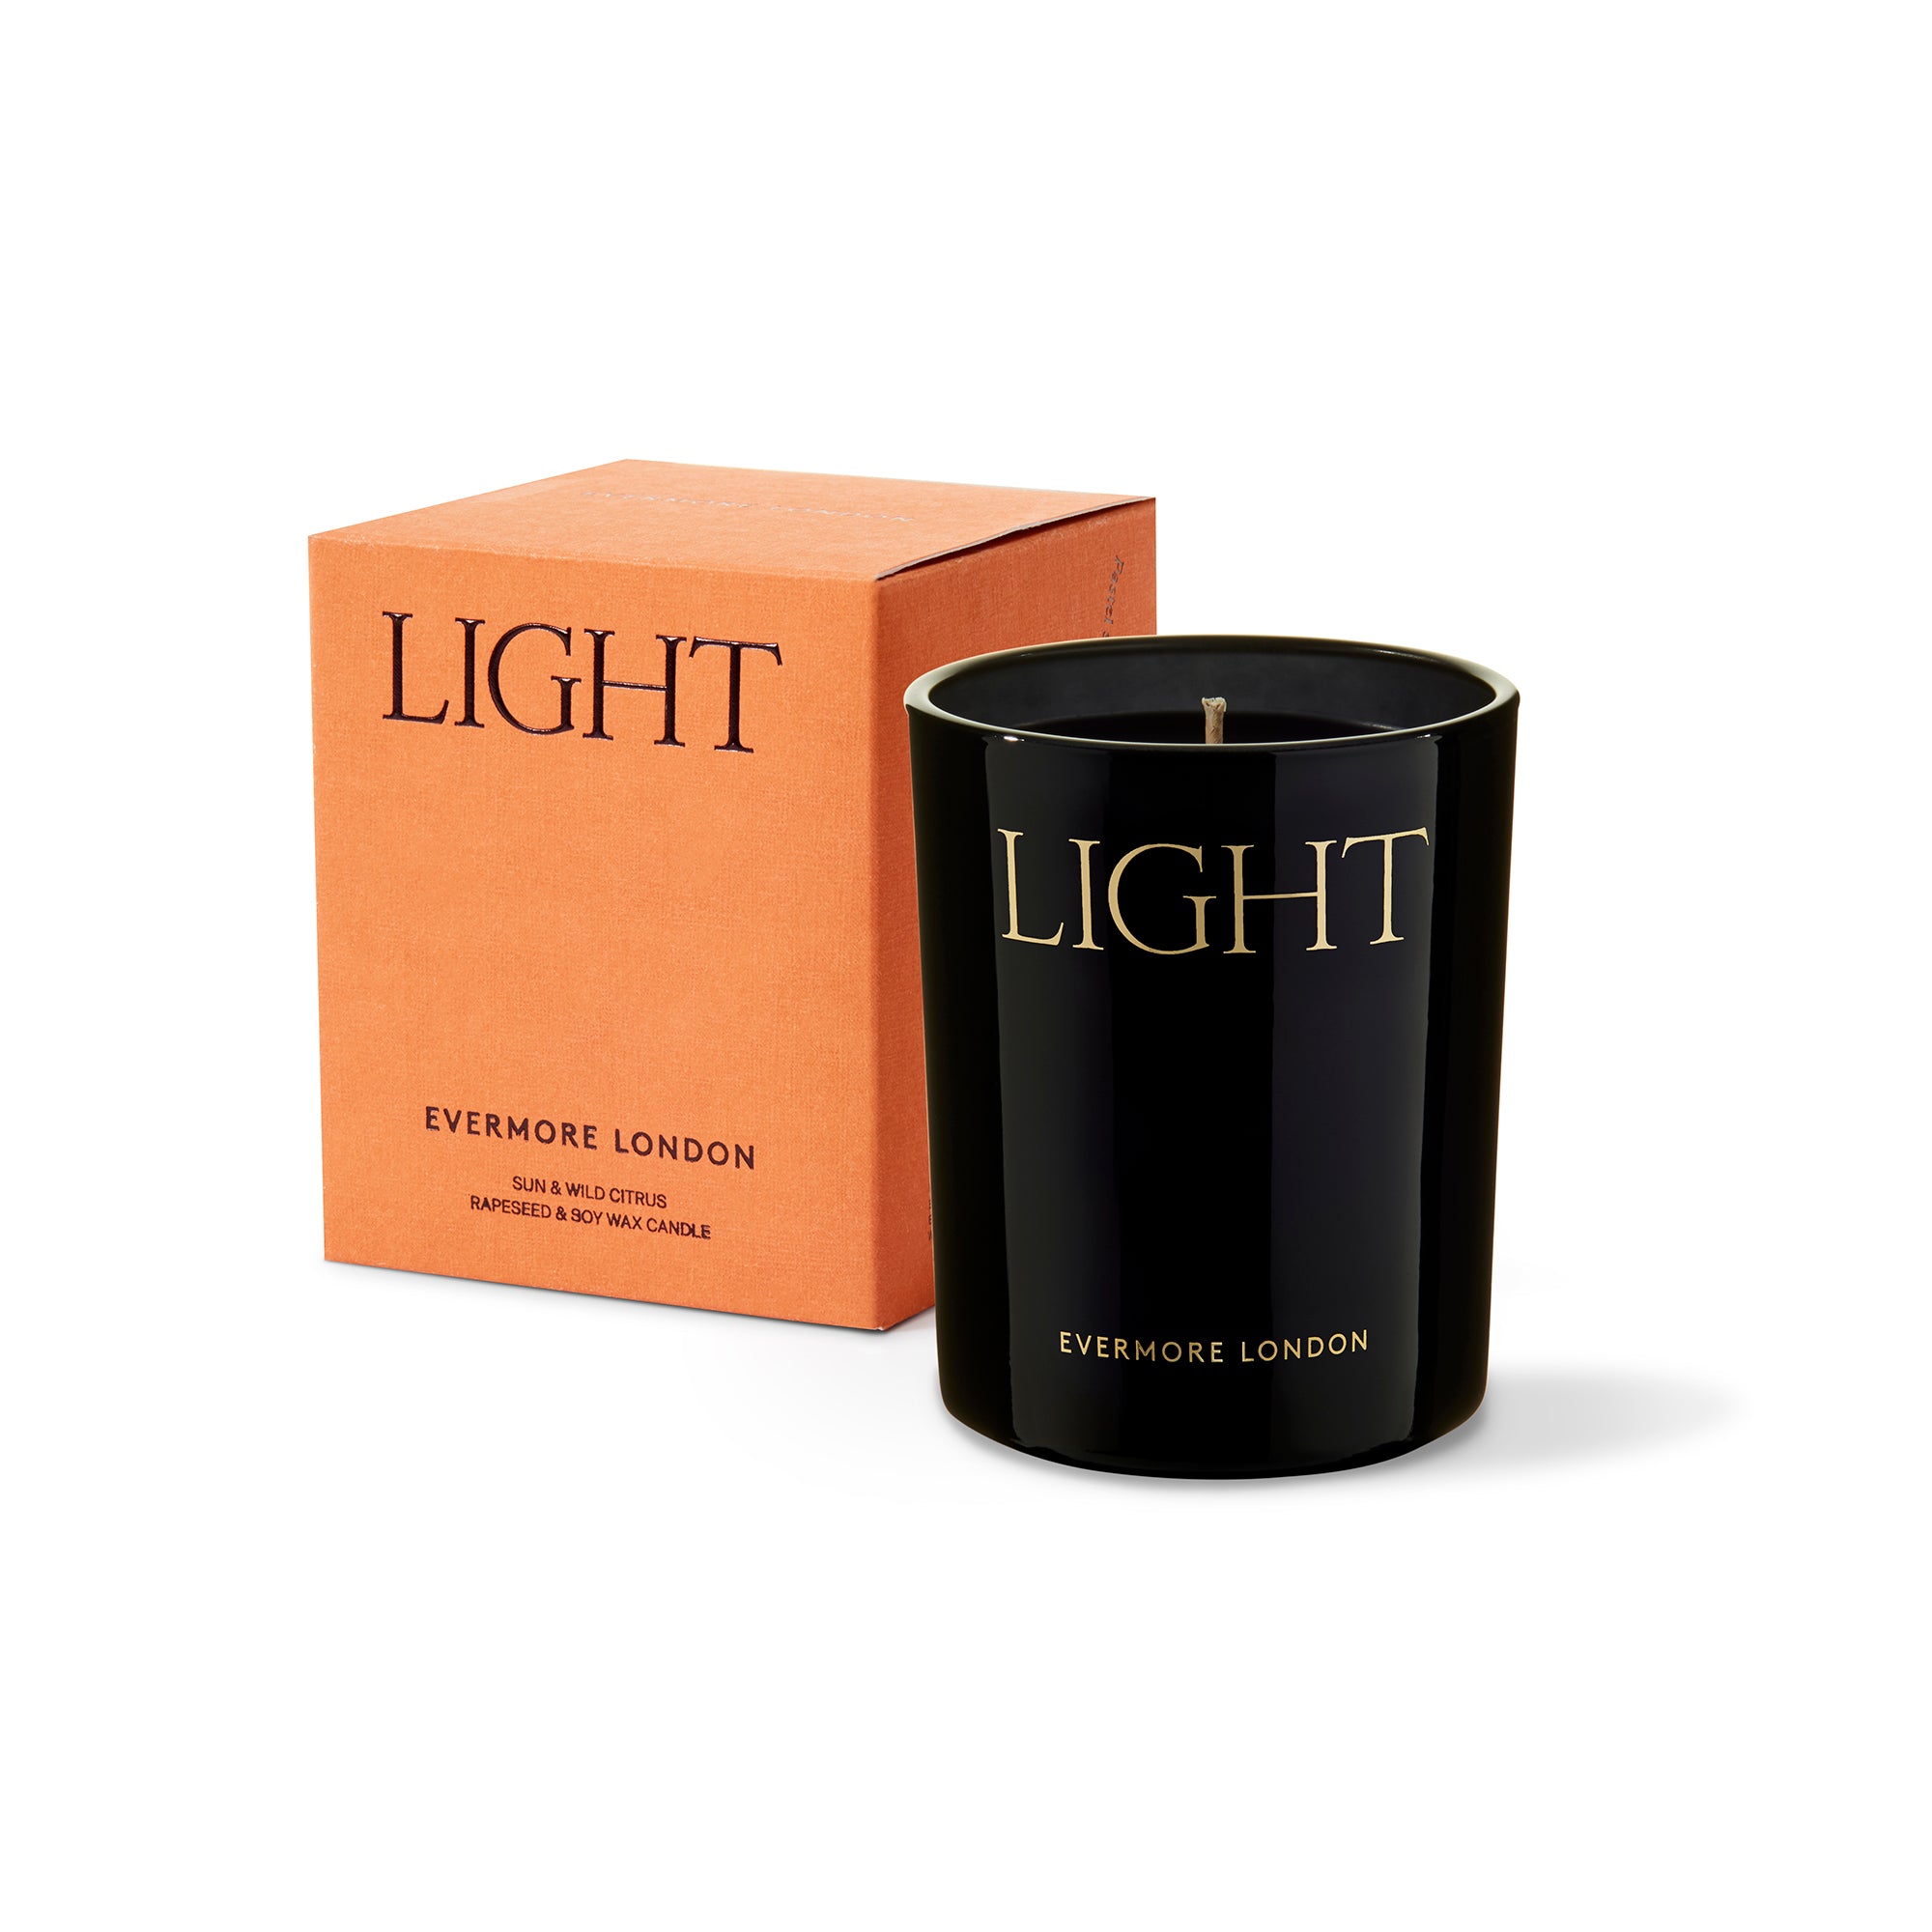 LIGHT CANDLE 300g